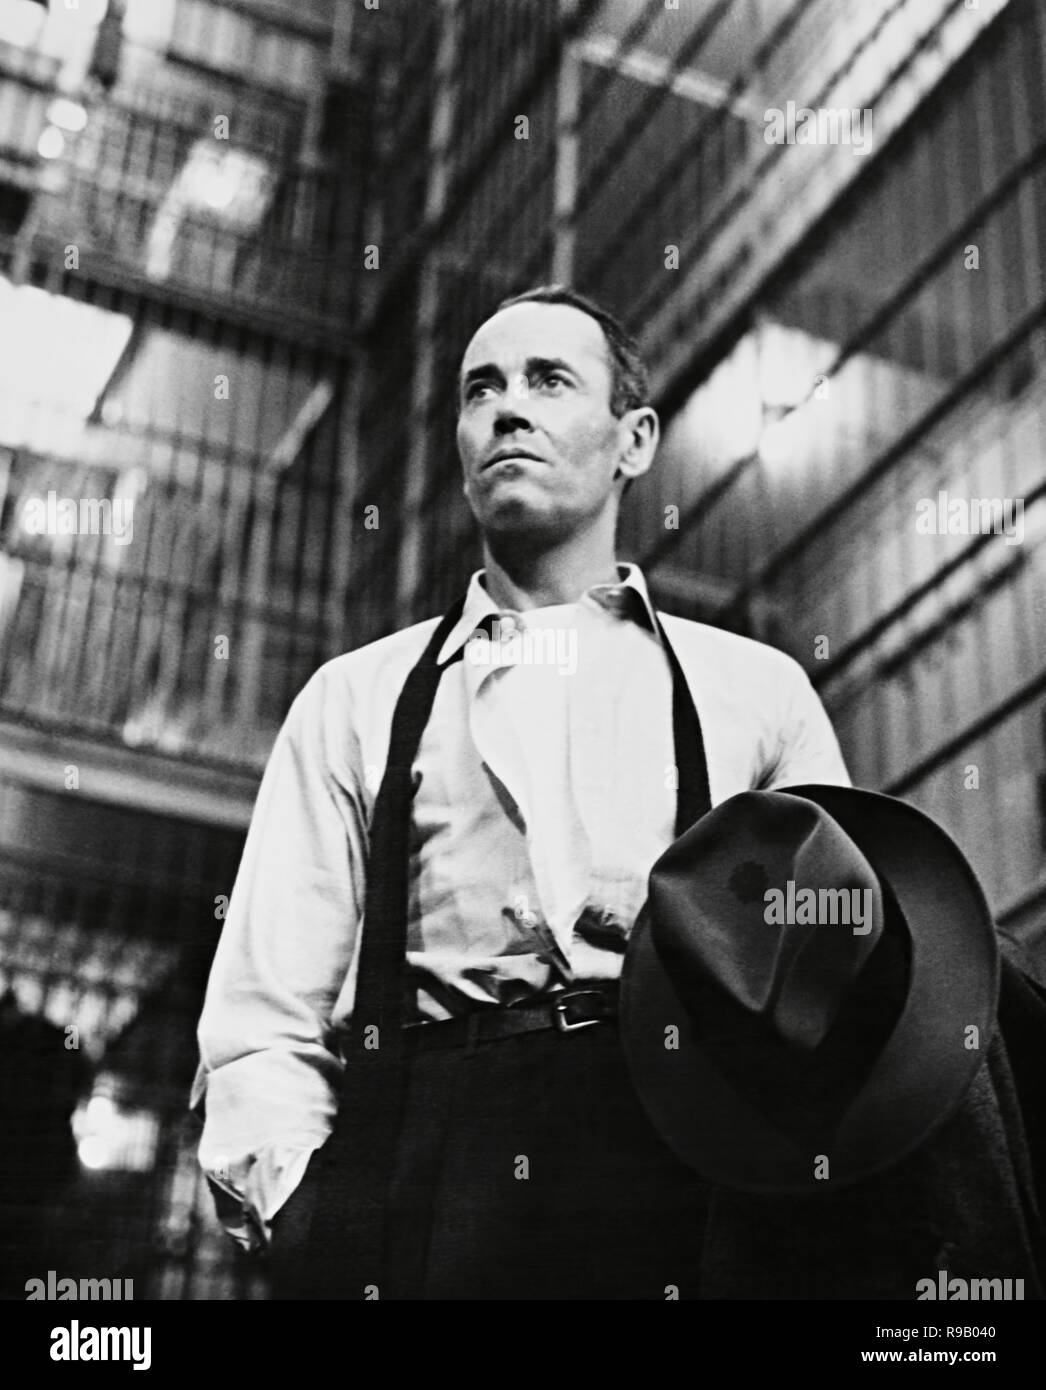 Original film title: THE WRONG MAN. English title: THE WRONG MAN. Year: 1956. Director: ALFRED HITCHCOCK. Stars: HENRY FONDA. Credit: WARNER BROTHERS / Album Stock Photo